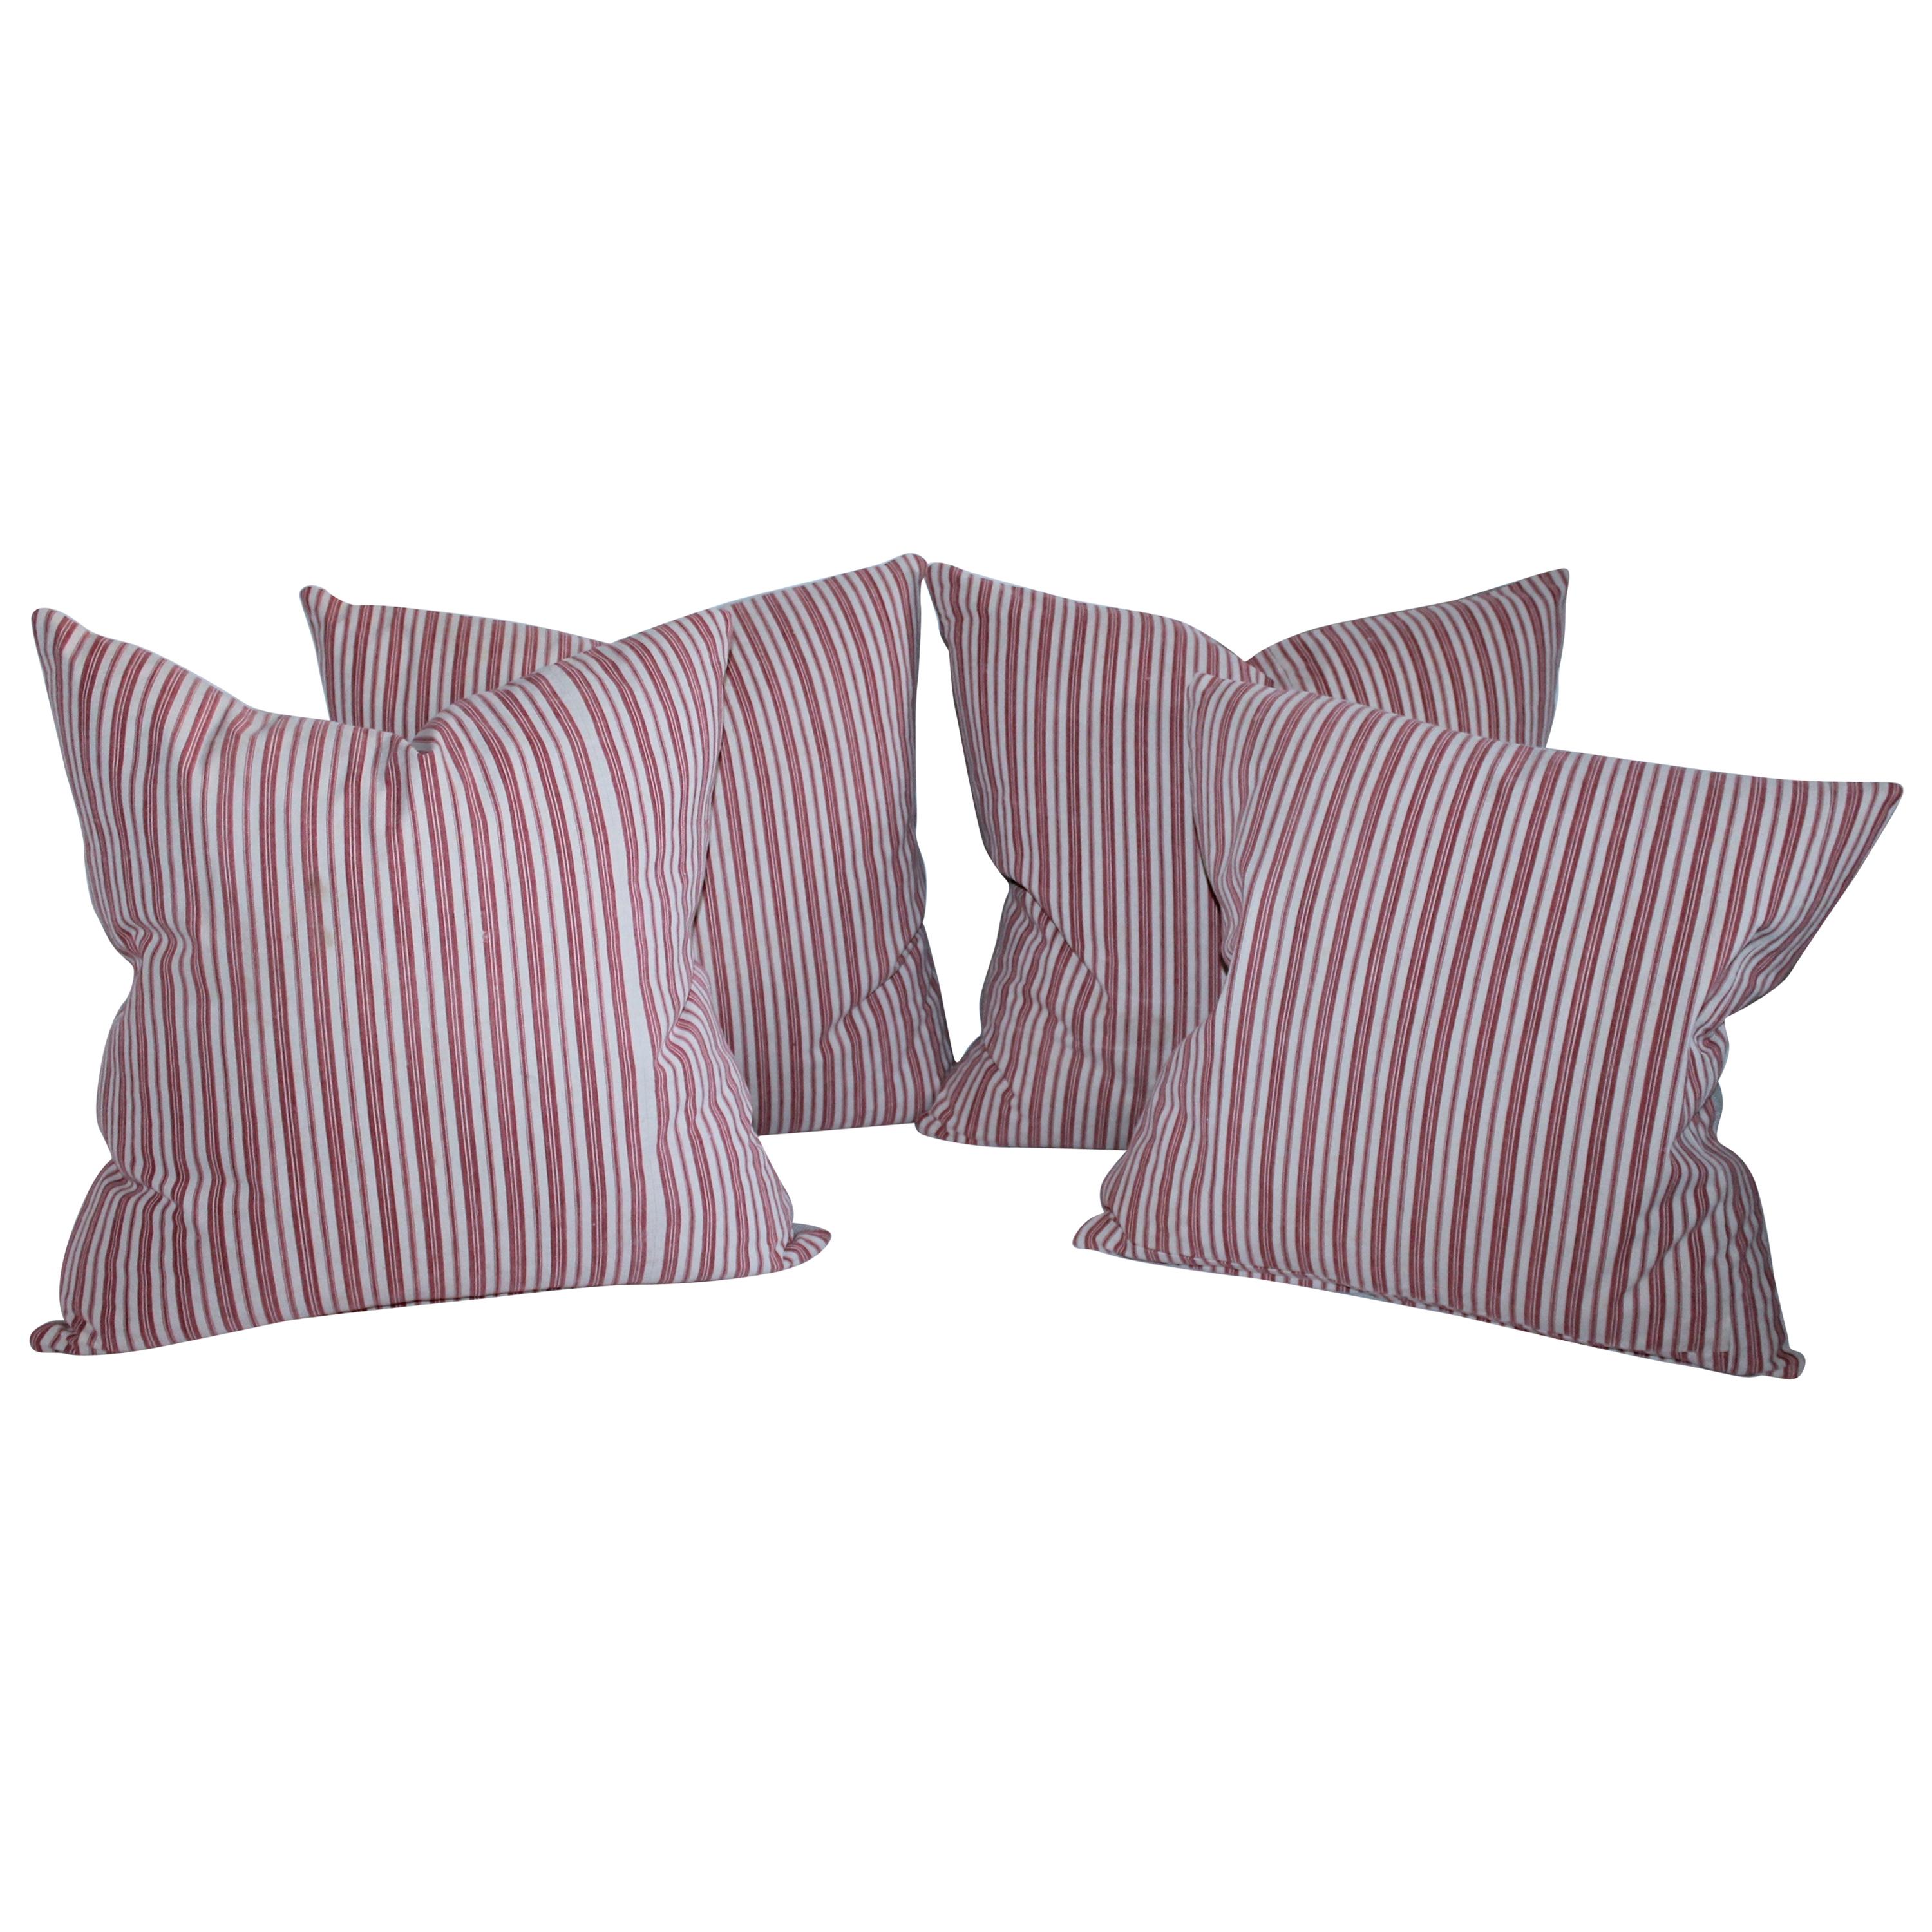 Collection of Four Red and White Vintage Ticking Pillows